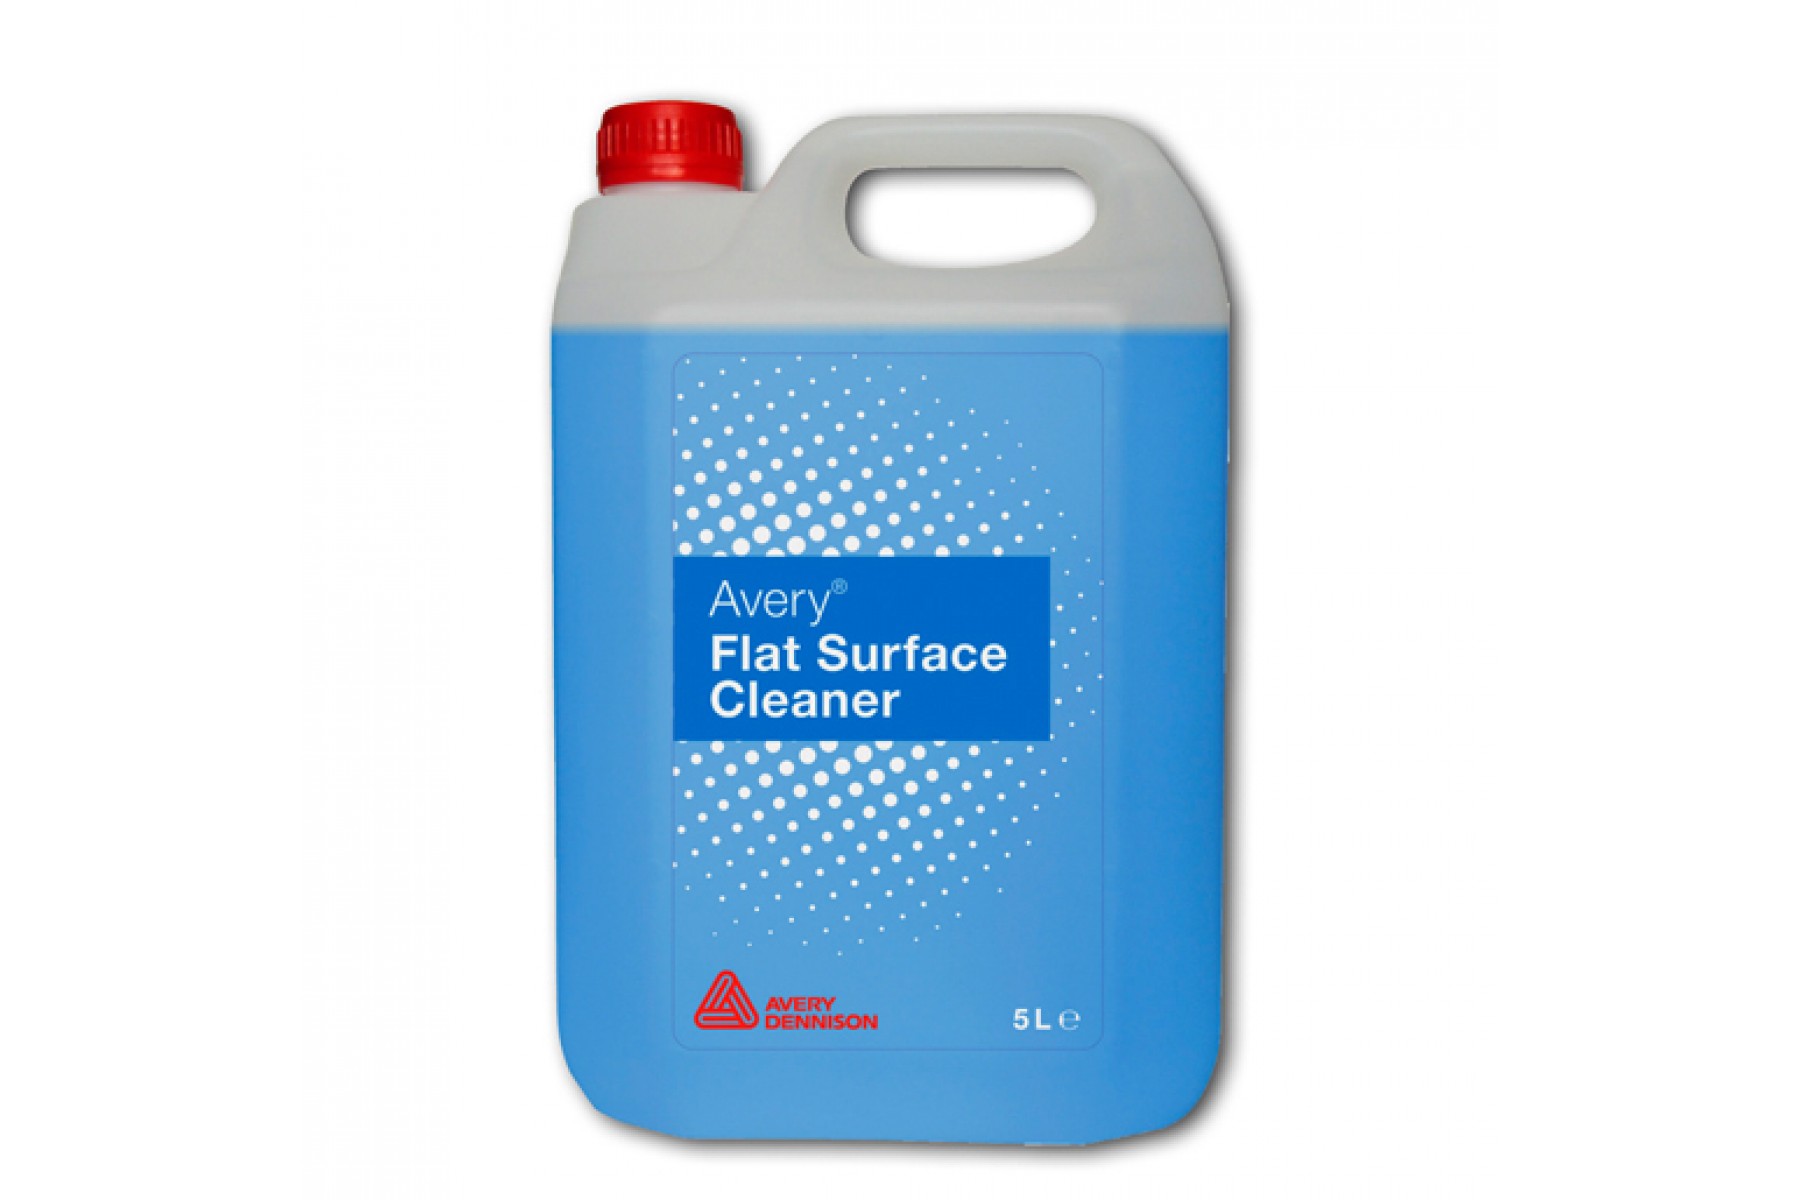 AVERY FLAT SURFACE CLEANER 5L